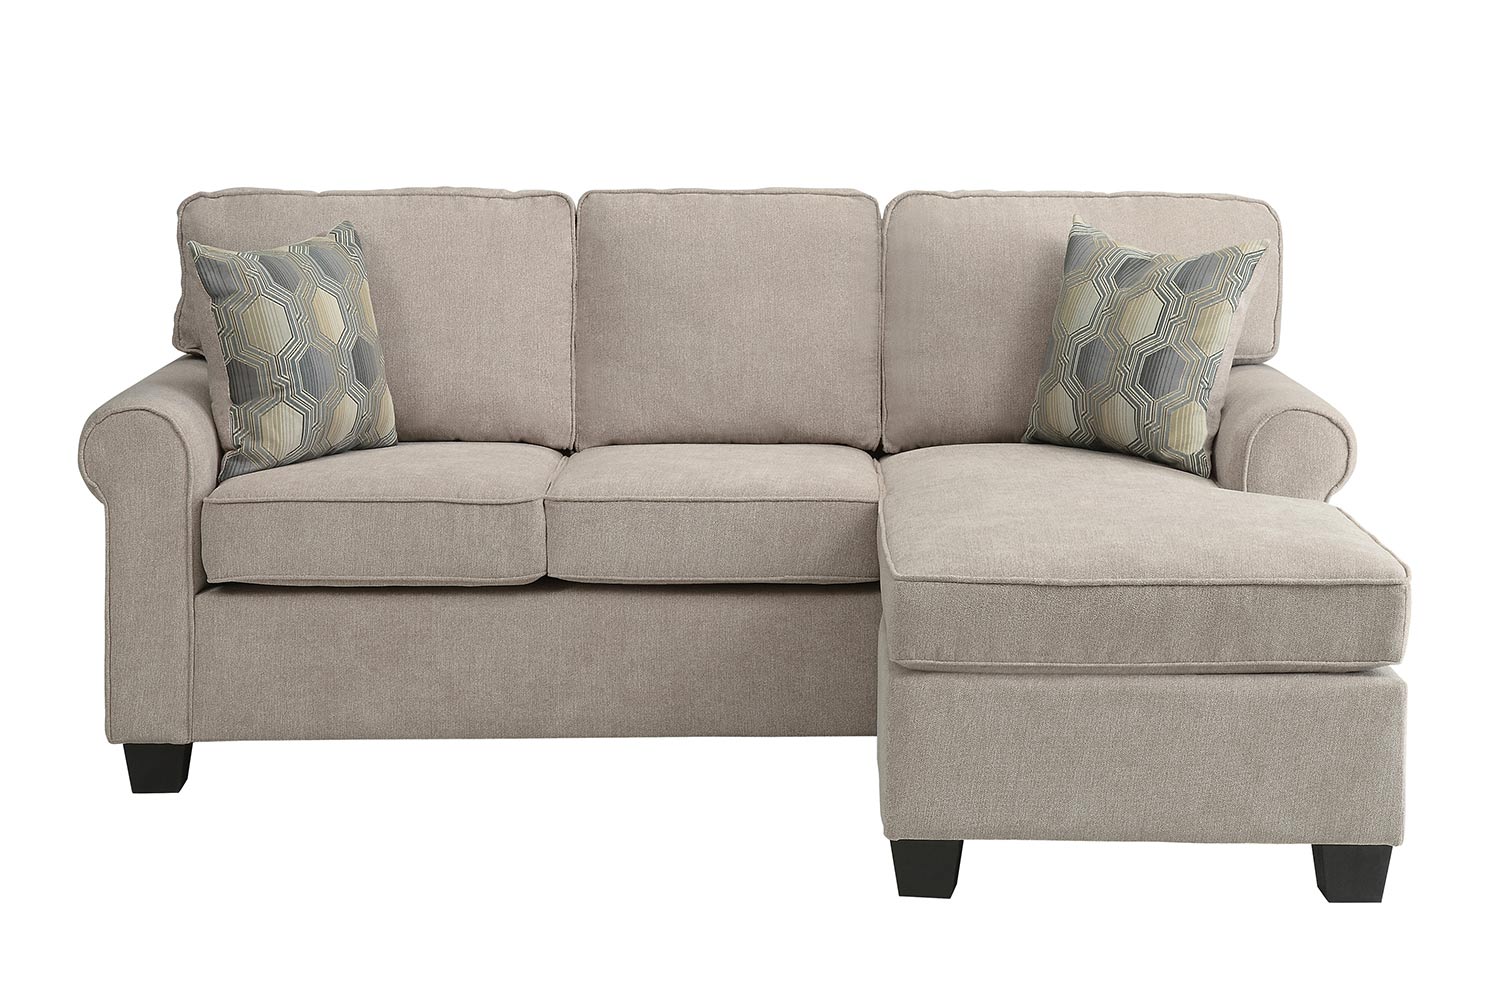 Homelegance Clumber Reversible Sofa Chaise Sectional - Sand